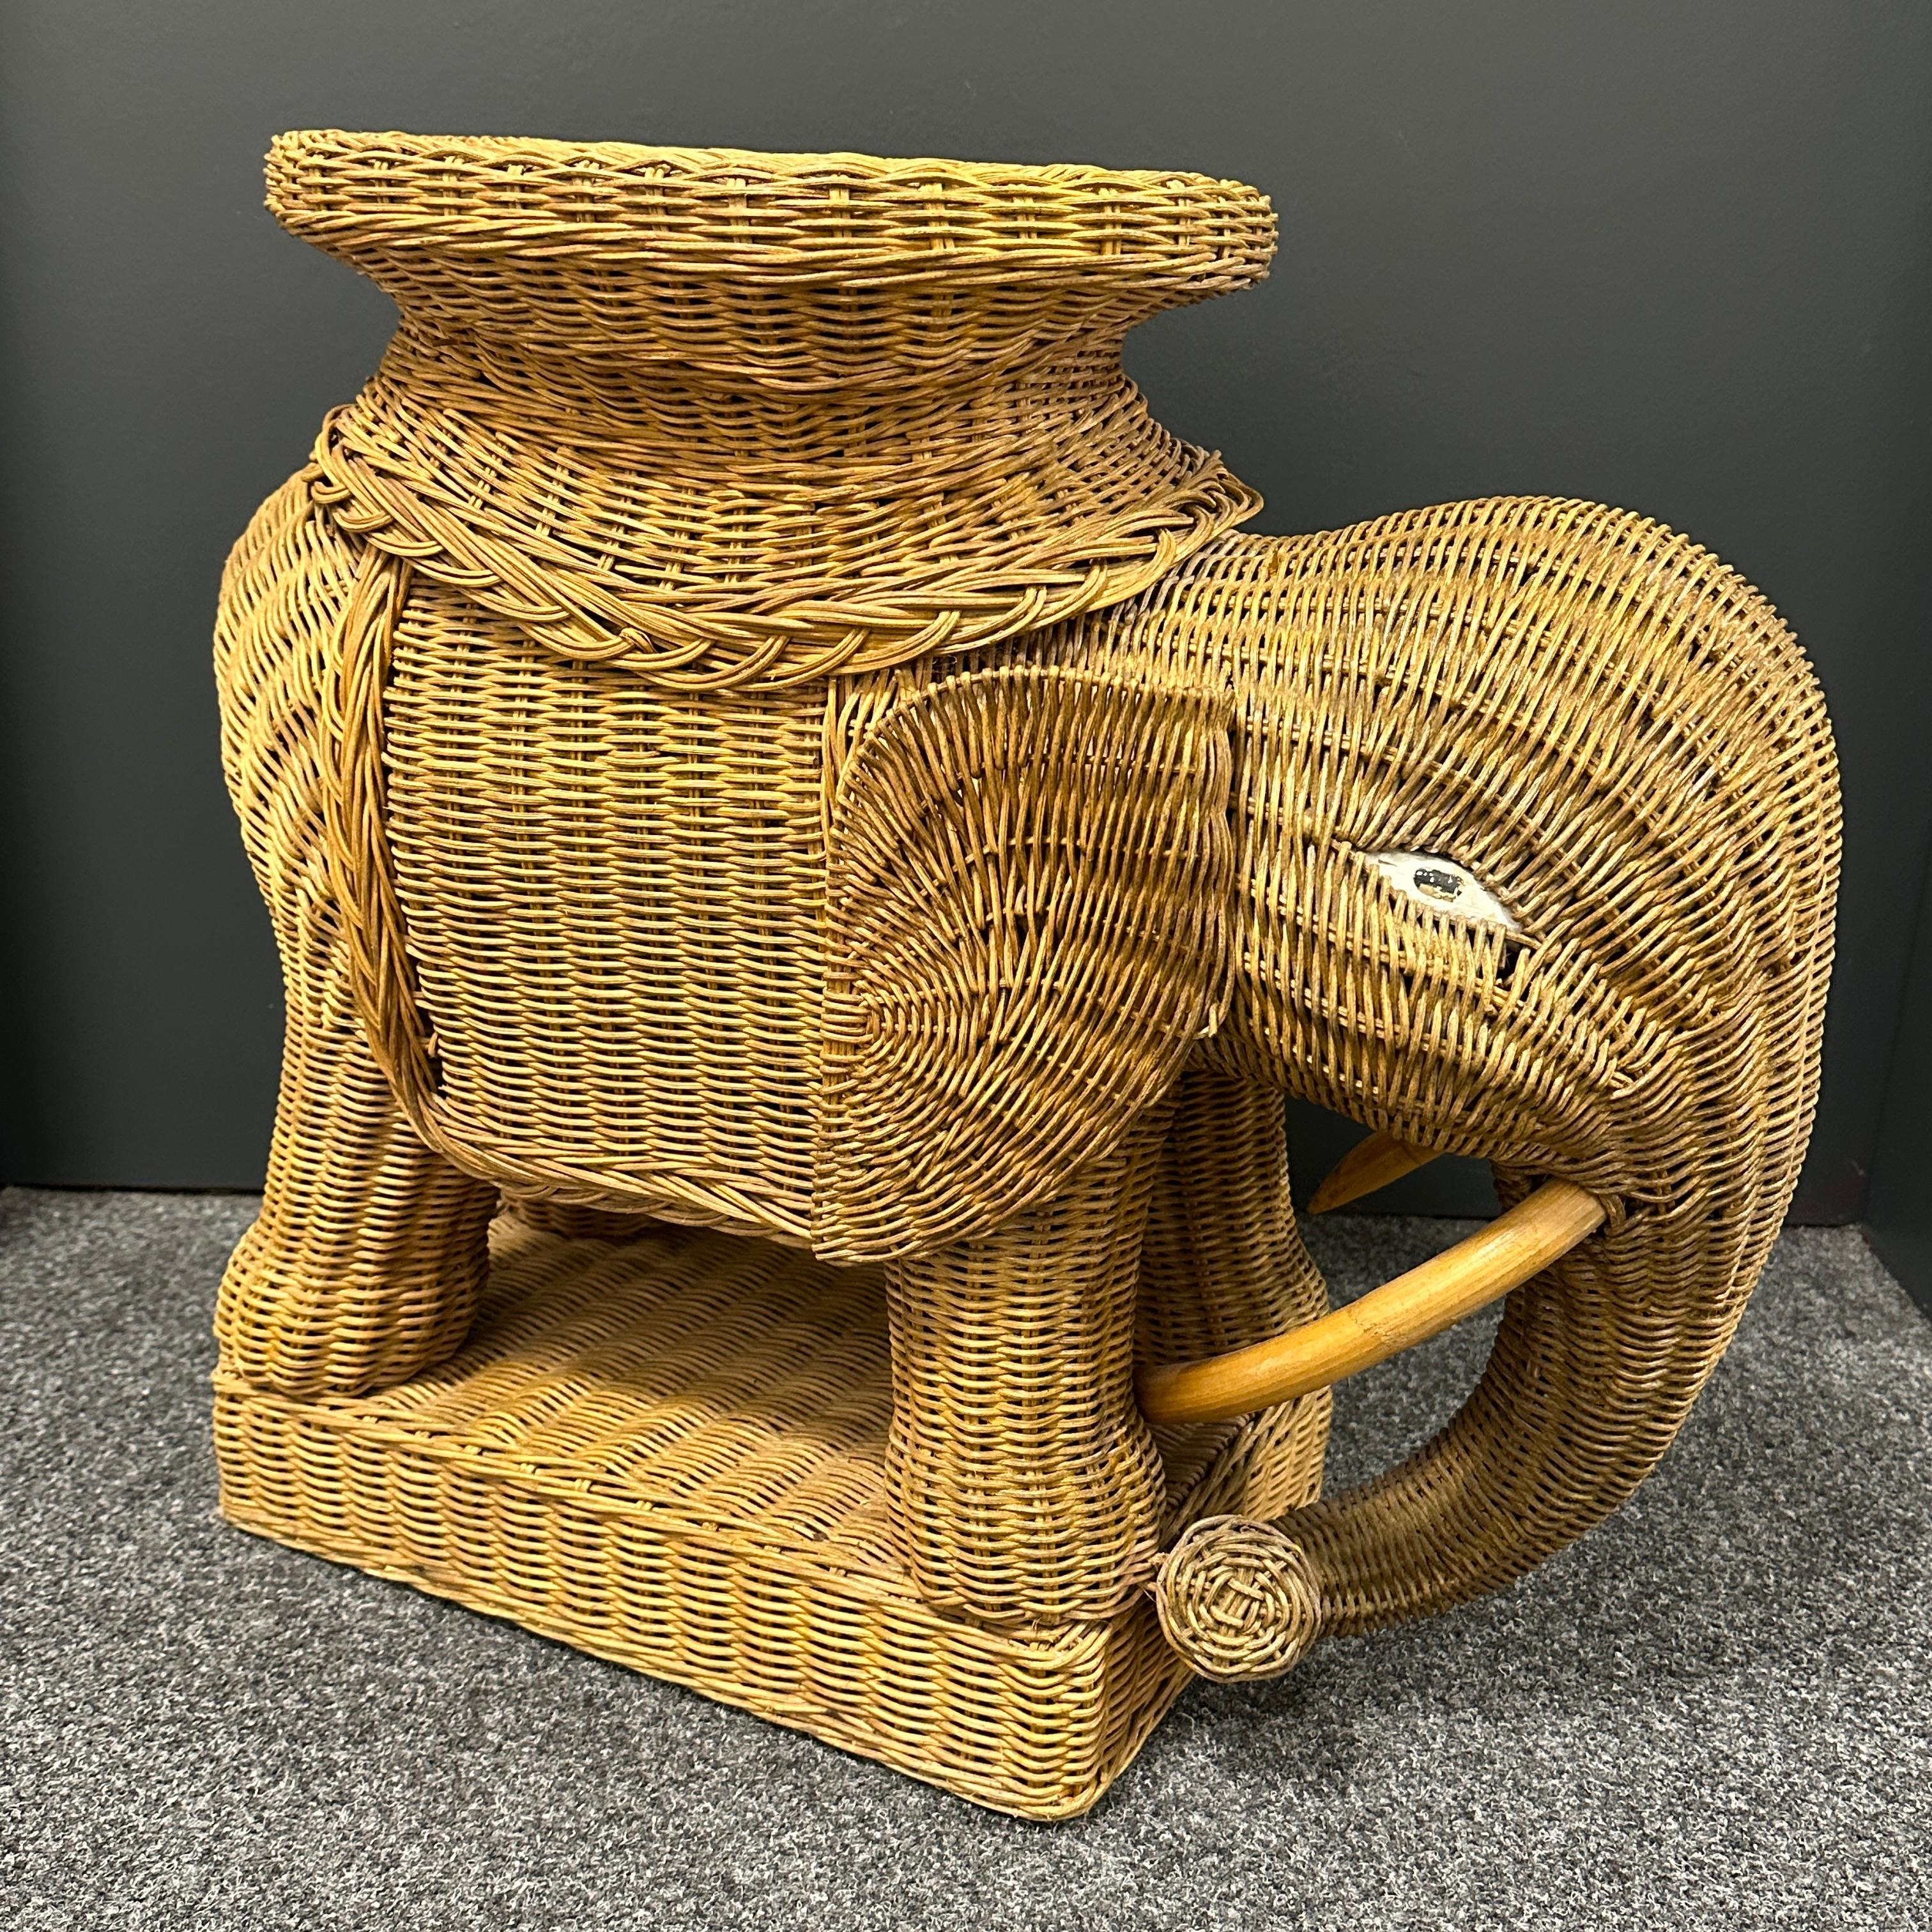 Mid-20th century eye-catching elephant-shaped end table or side table, constructed in hand-braided rattan accented with wood tusks. Nice addition to your home, patio or garden. This is in used condition, with signs of wear as expected with age and